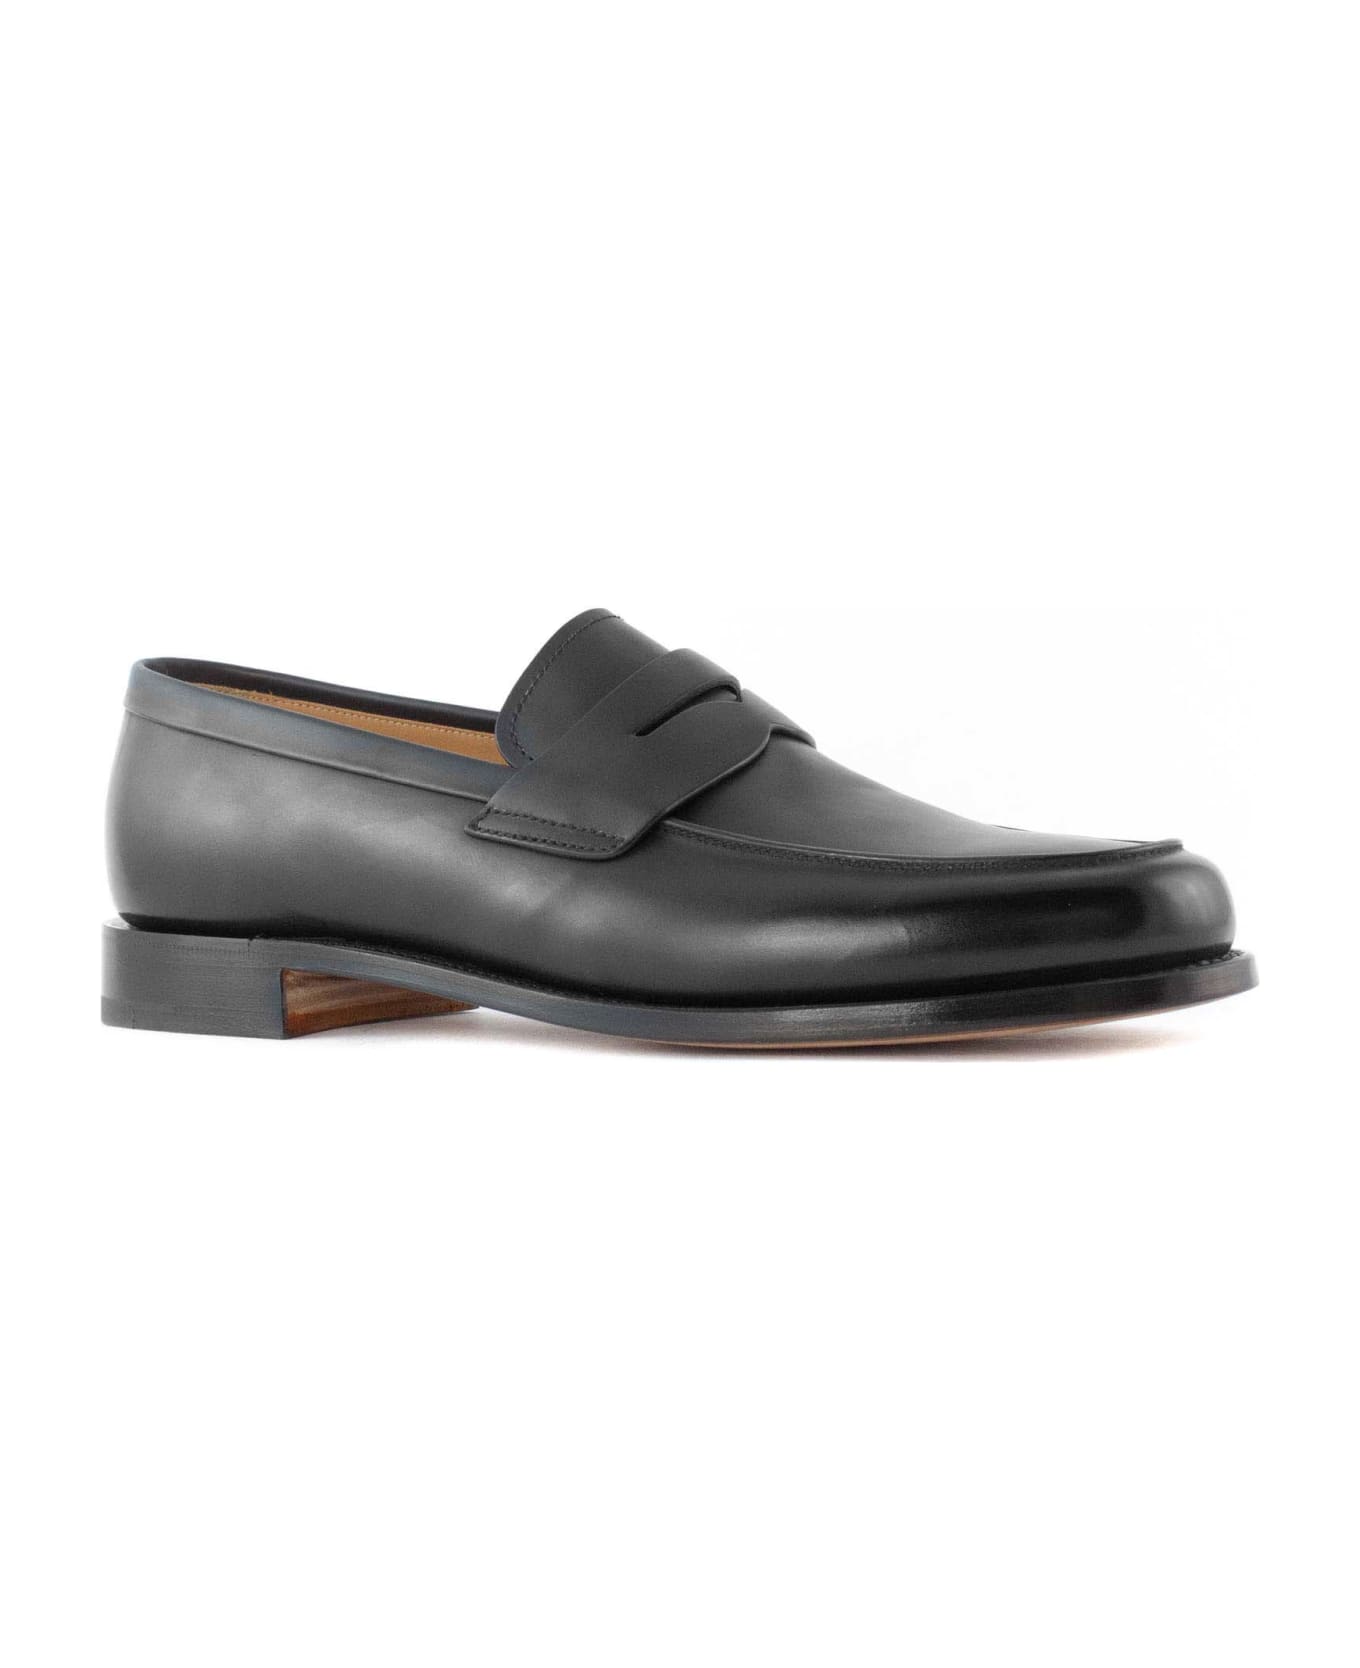 Church's Loafer In Black Leather - Black ローファー＆デッキシューズ